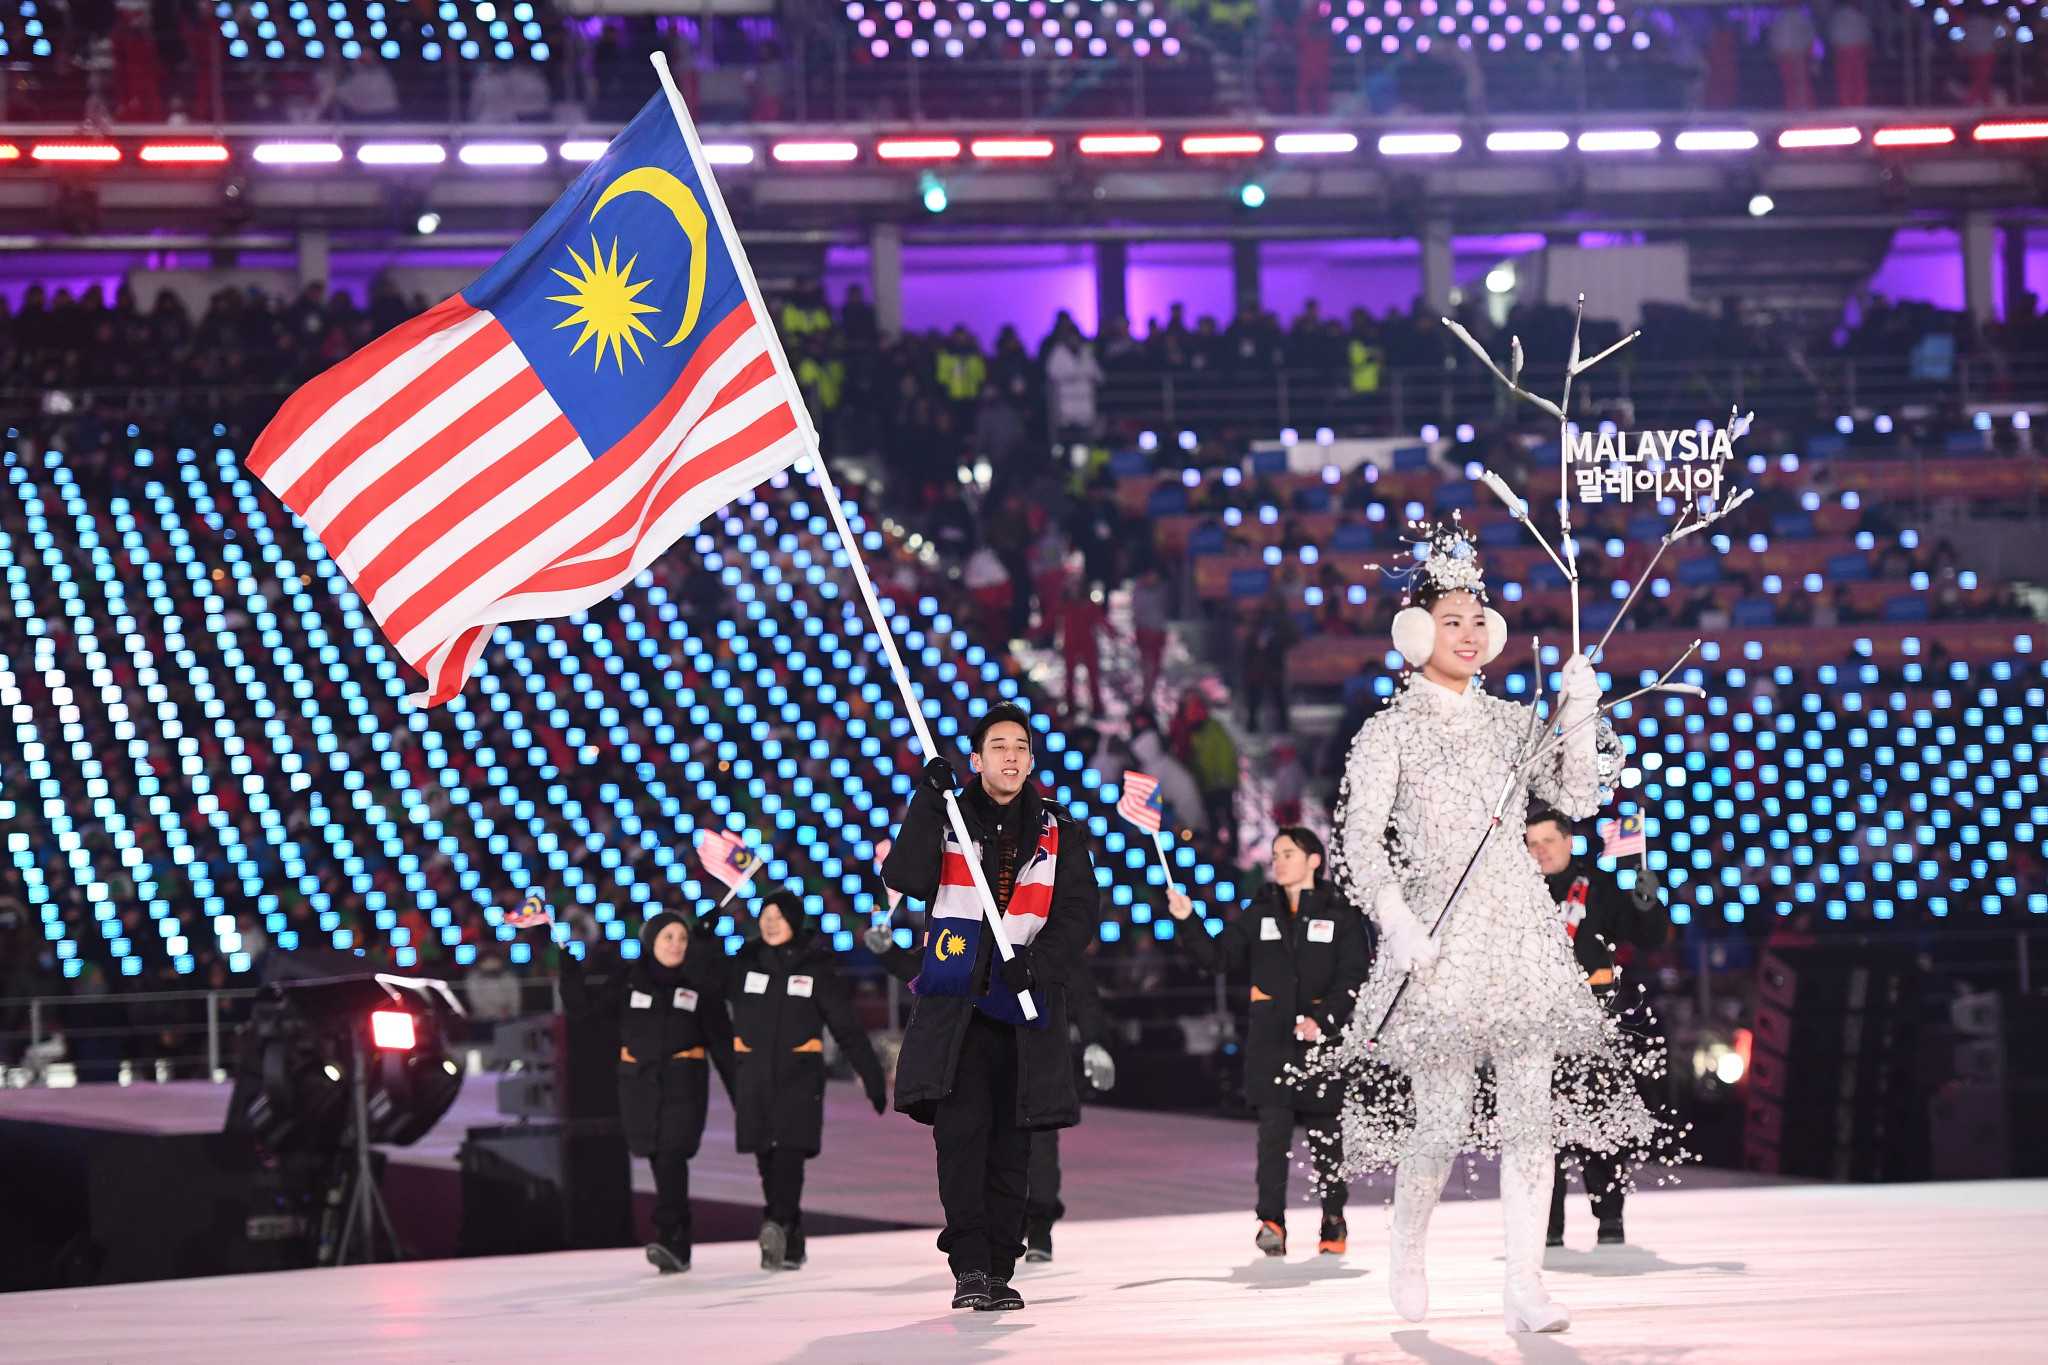 Malaysia is hoping to encourage more women to become involved with its sports governance ©Getty Images